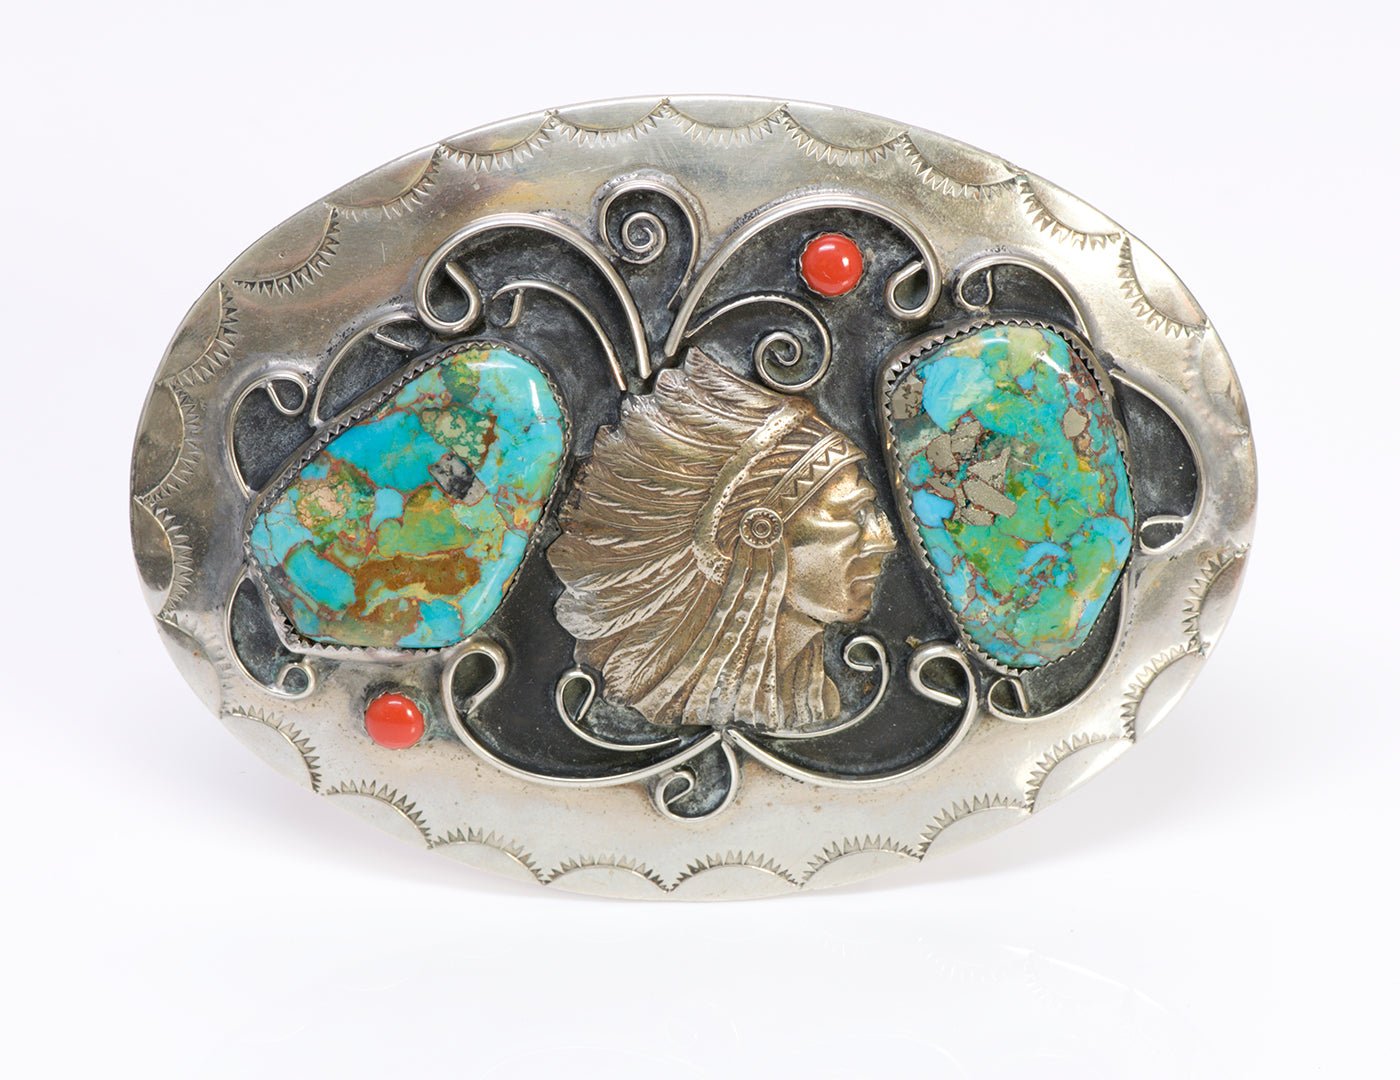 American Indian Chief Turquoise Coral Belt Buckle